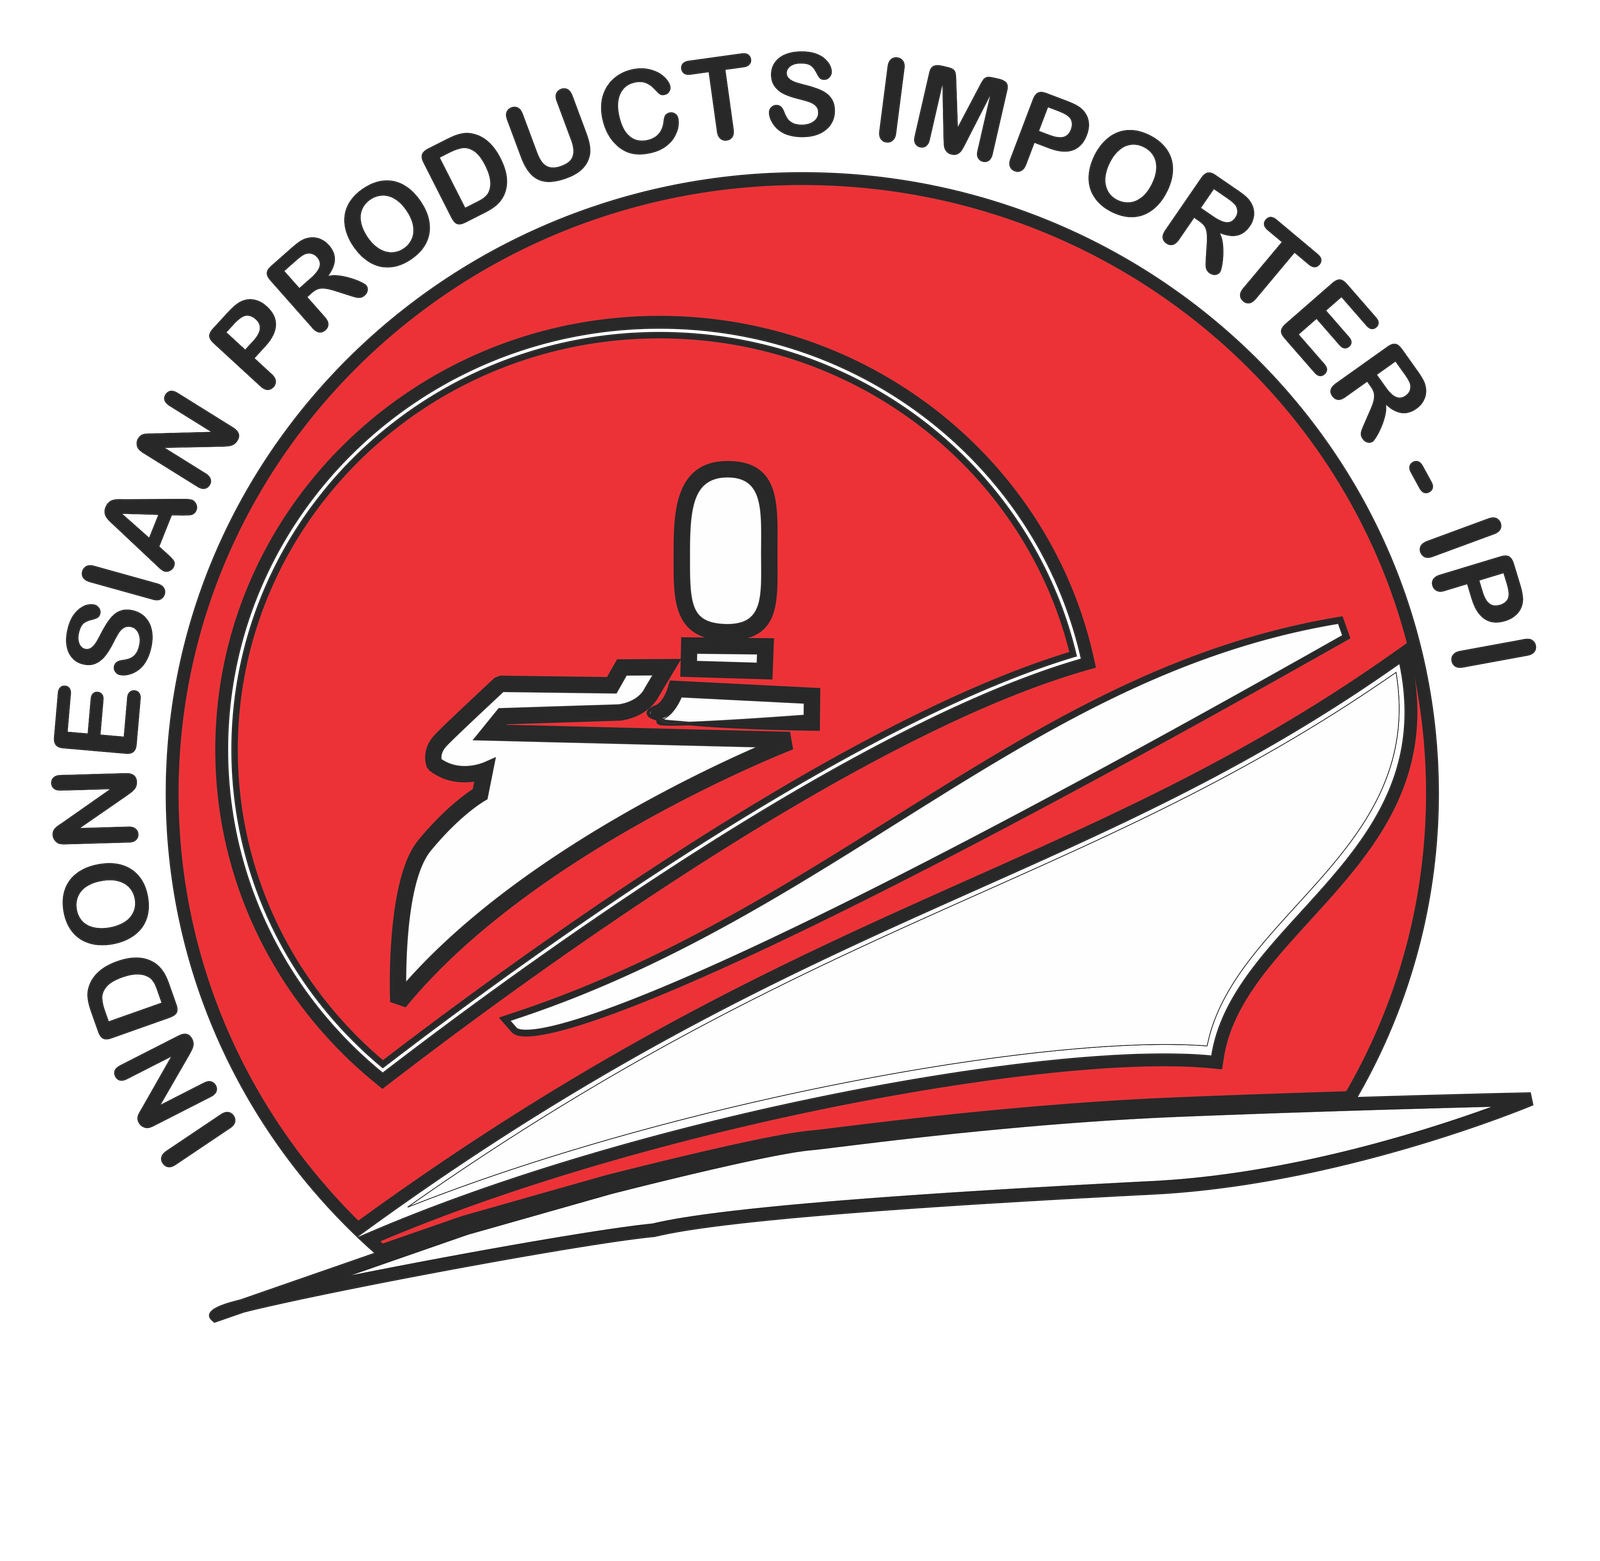 Indonesian Products Importer